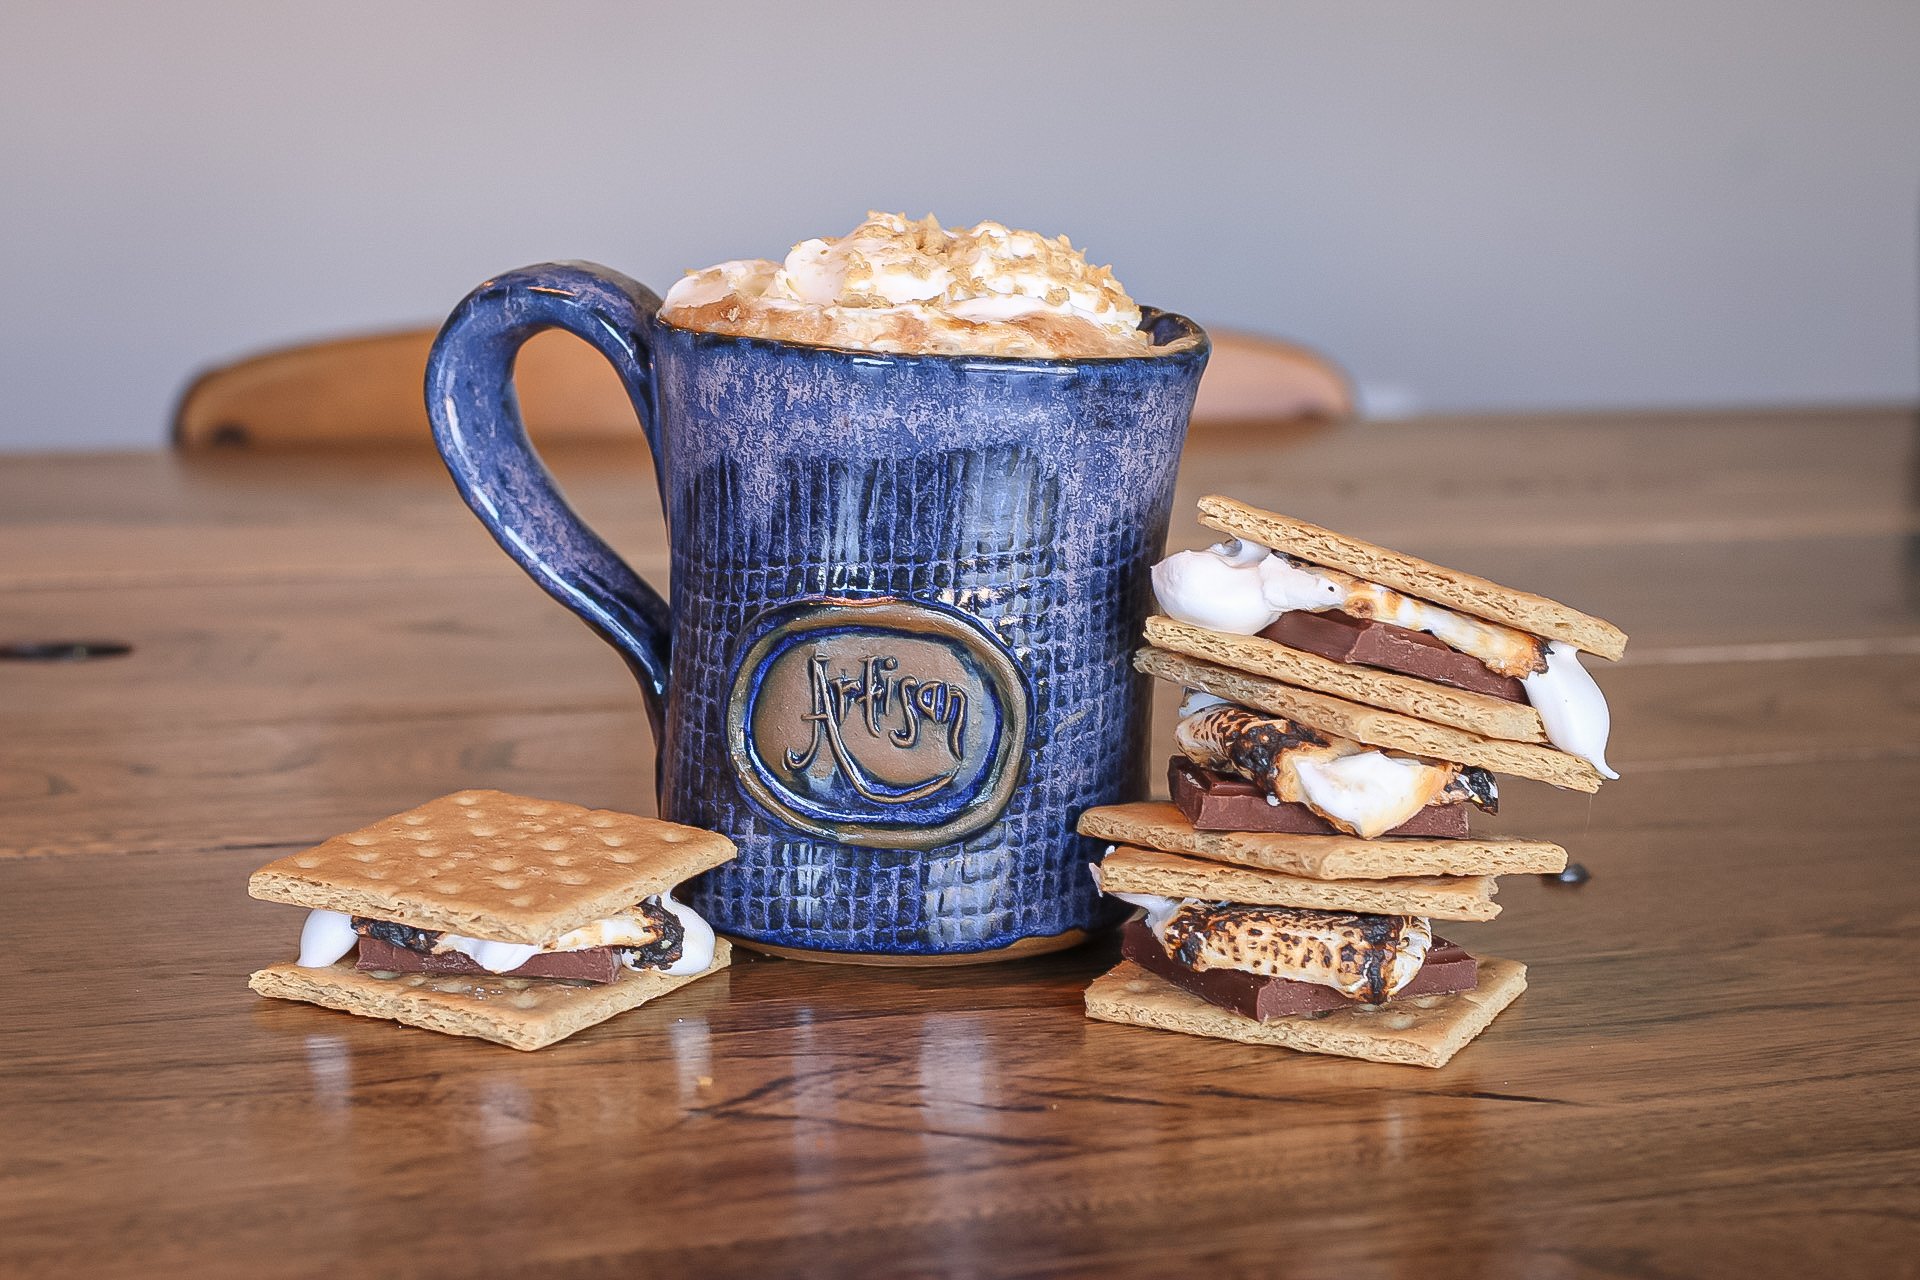 Can you believe it's already time for our new featured drink menu? First up in our introductions is the crowd favorite S'mores Mocha! 🍫☕️

Made with toasted marshmallow and mocha syrups, espresso, and milk, and topped with whipped cream and graham c